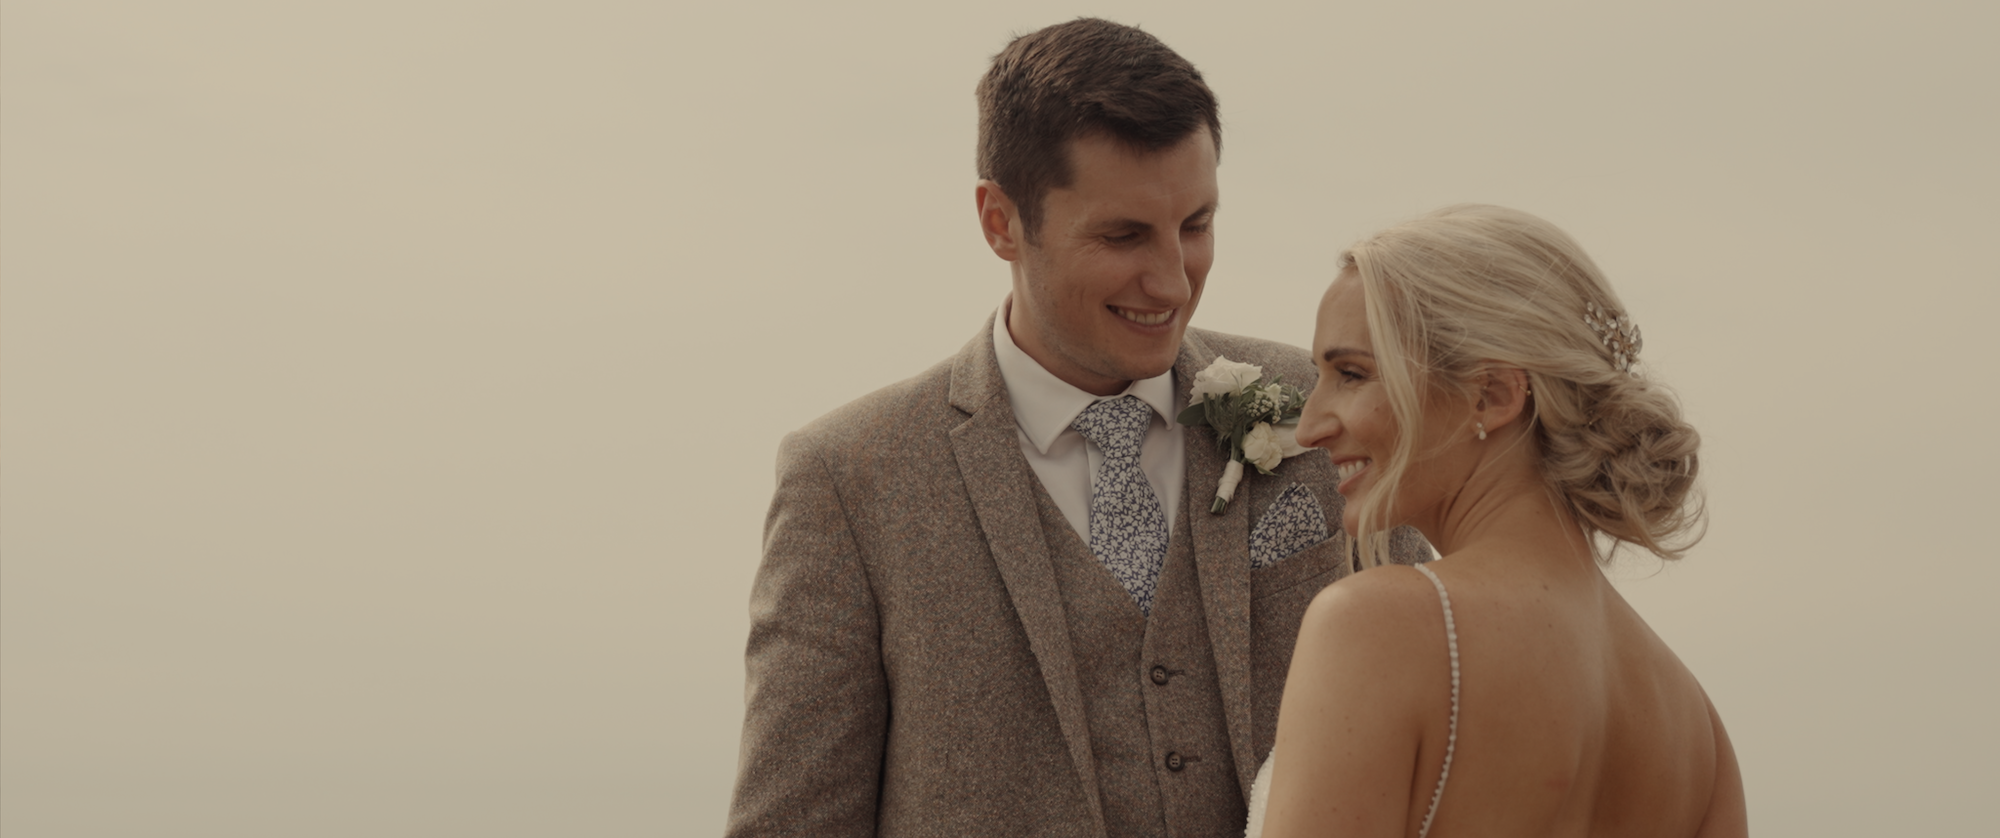 Oxwich Bay Hotel Wedding Videography by Ben Holbrook Films (Swansea South Wales).jpeg16.png